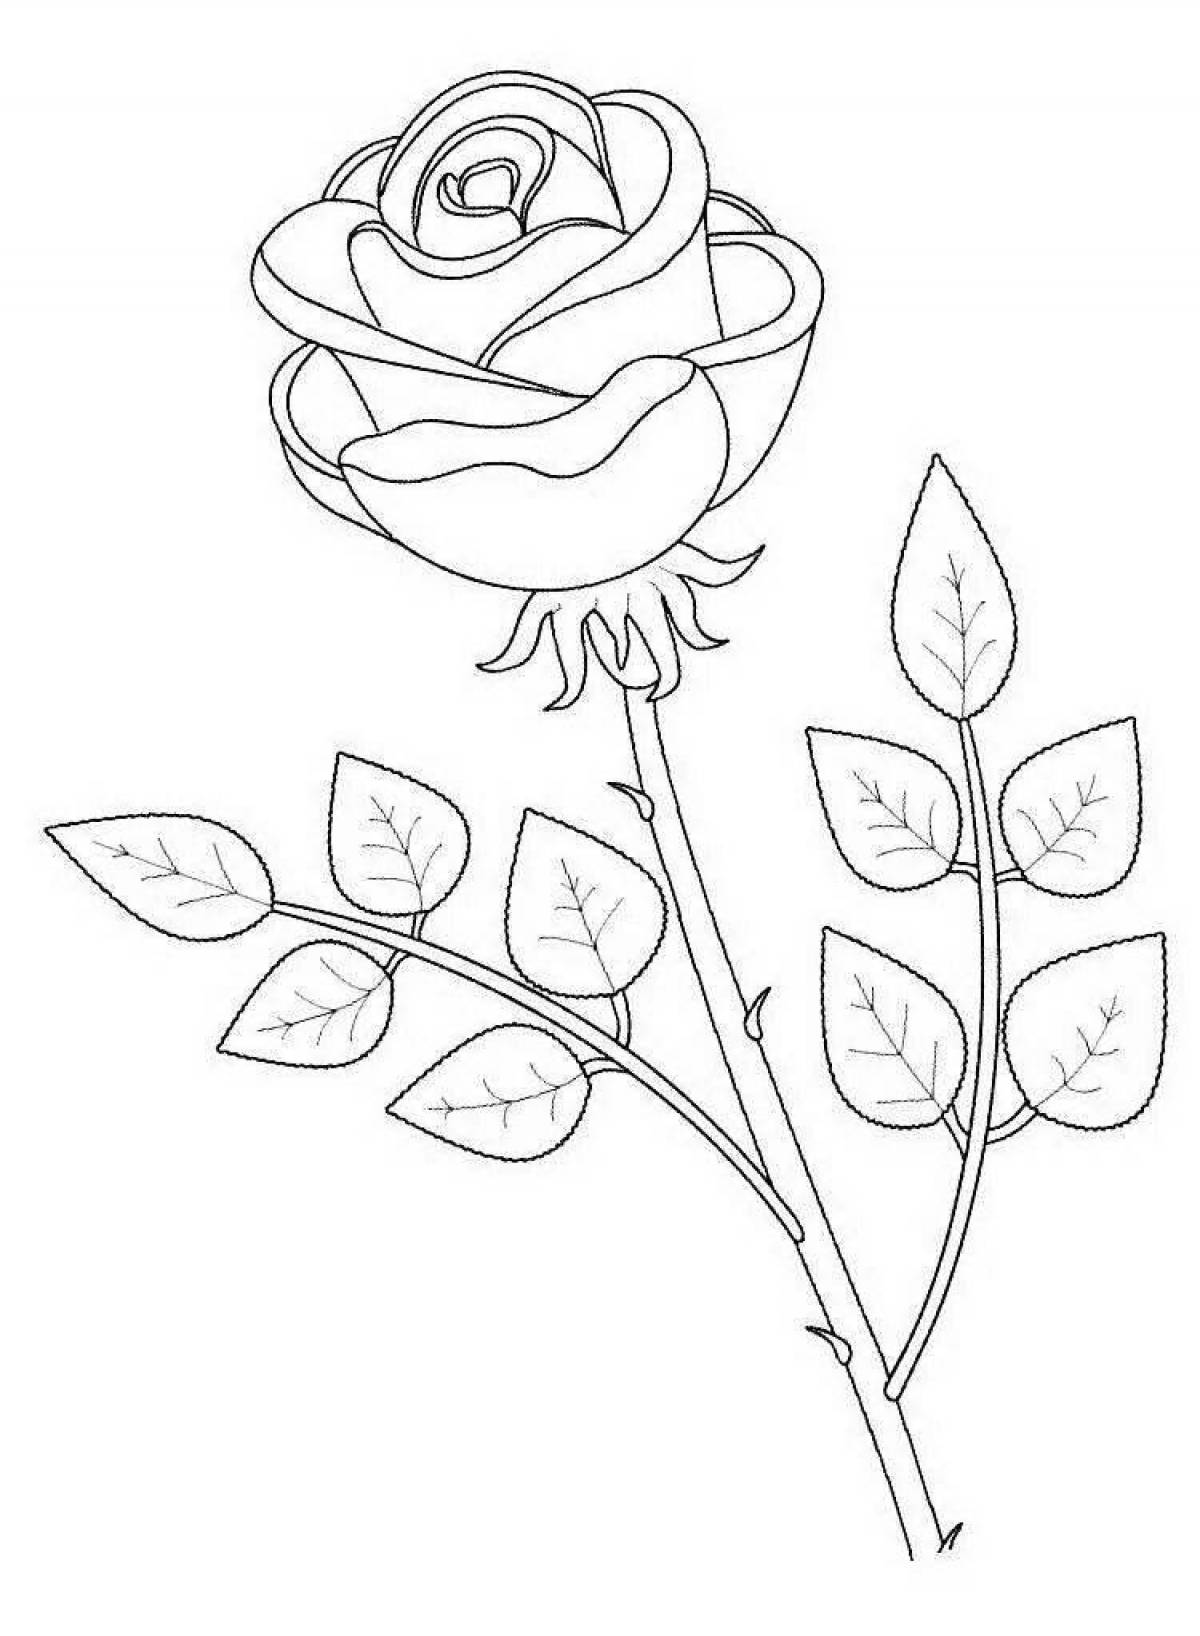 Essential coloring drawing of a rose